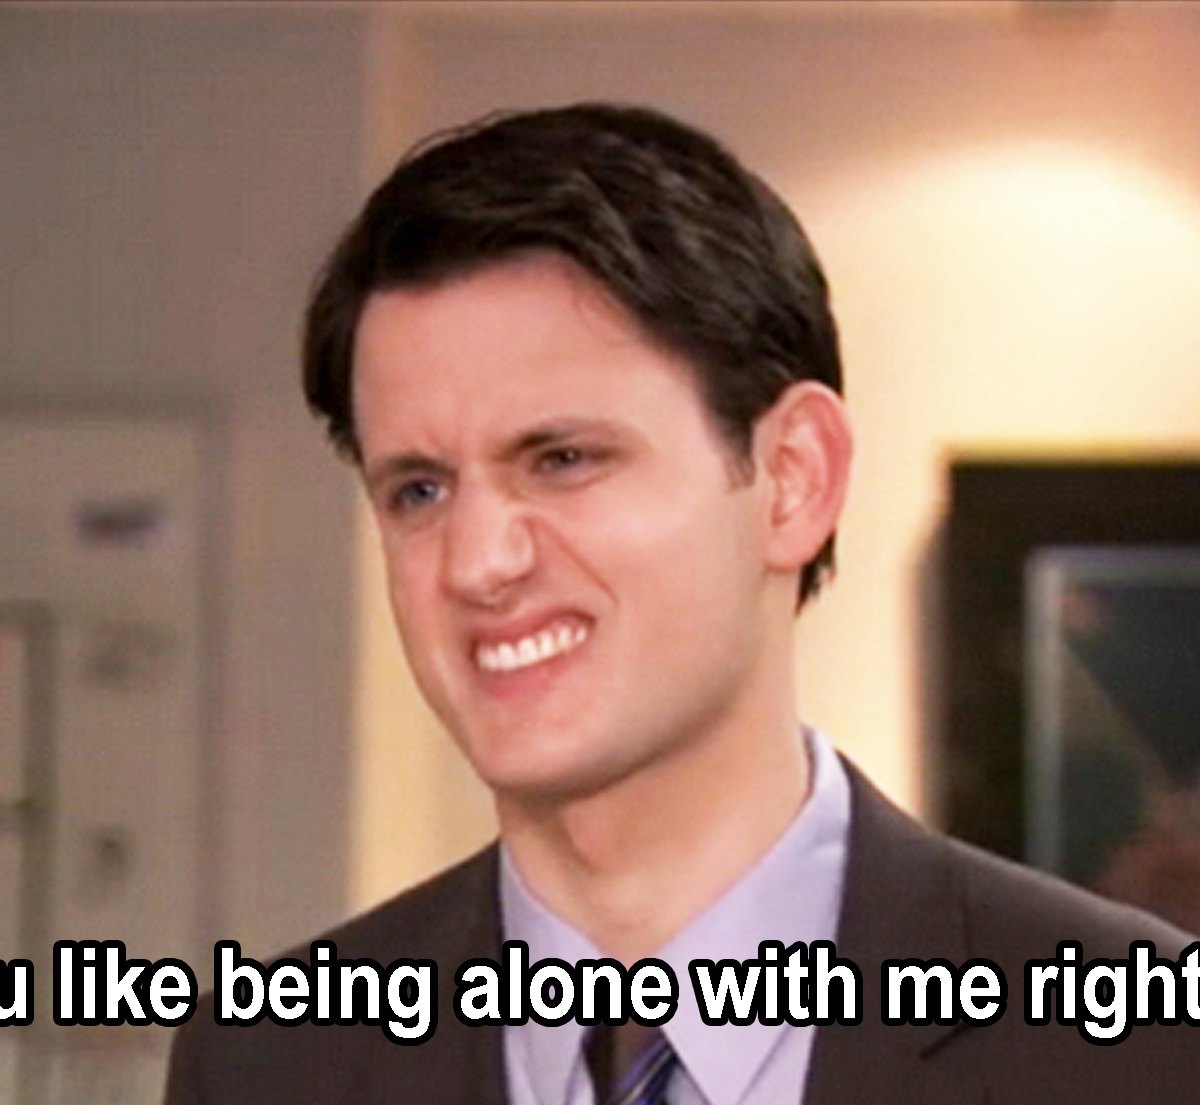 The Office' Quotes That Would Make the Best Pickup Lines in Real Life